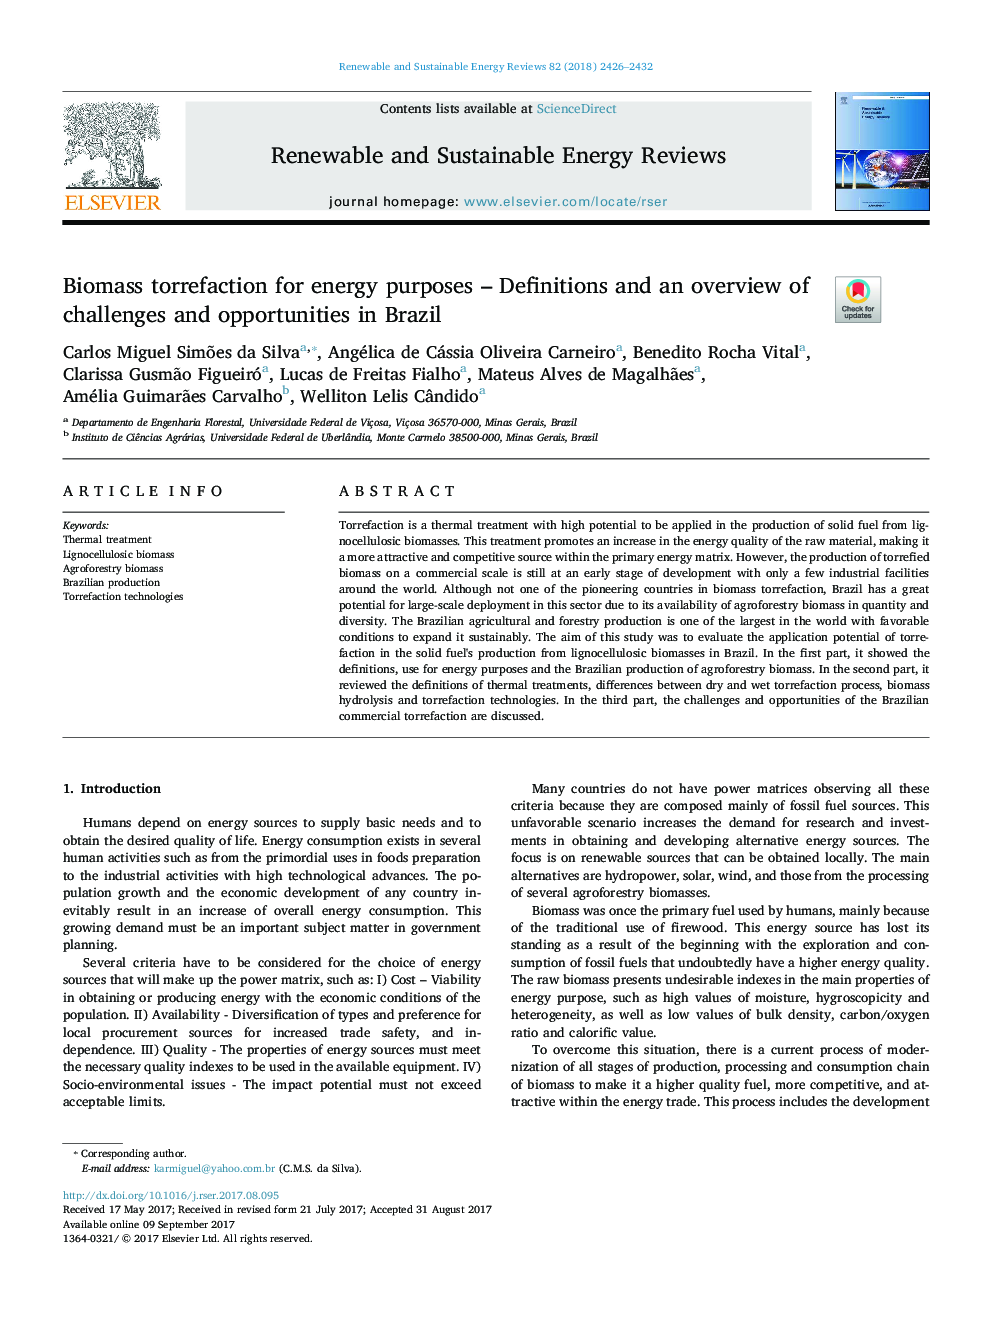 Biomass torrefaction for energy purposes - Definitions and an overview of challenges and opportunities in Brazil